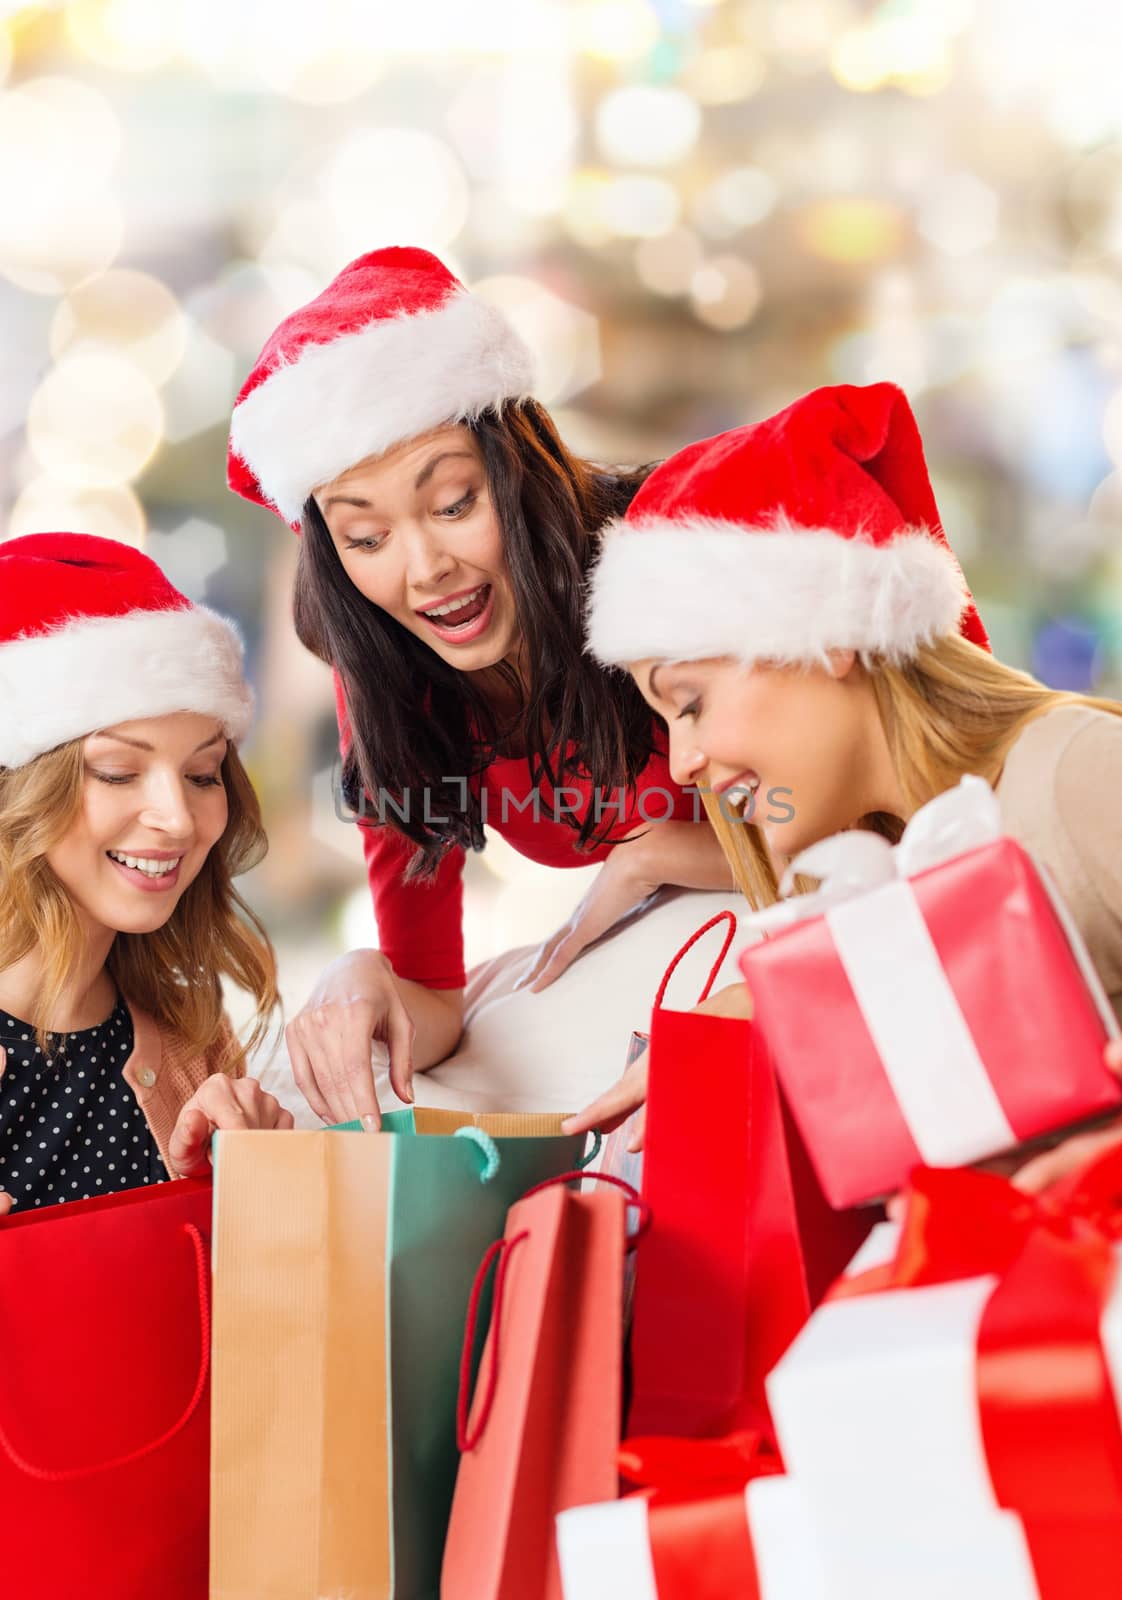 sale, winter holidays, christmas and people concept - smiling young woman in santa helper hat with gifts and shopping bags over lights background